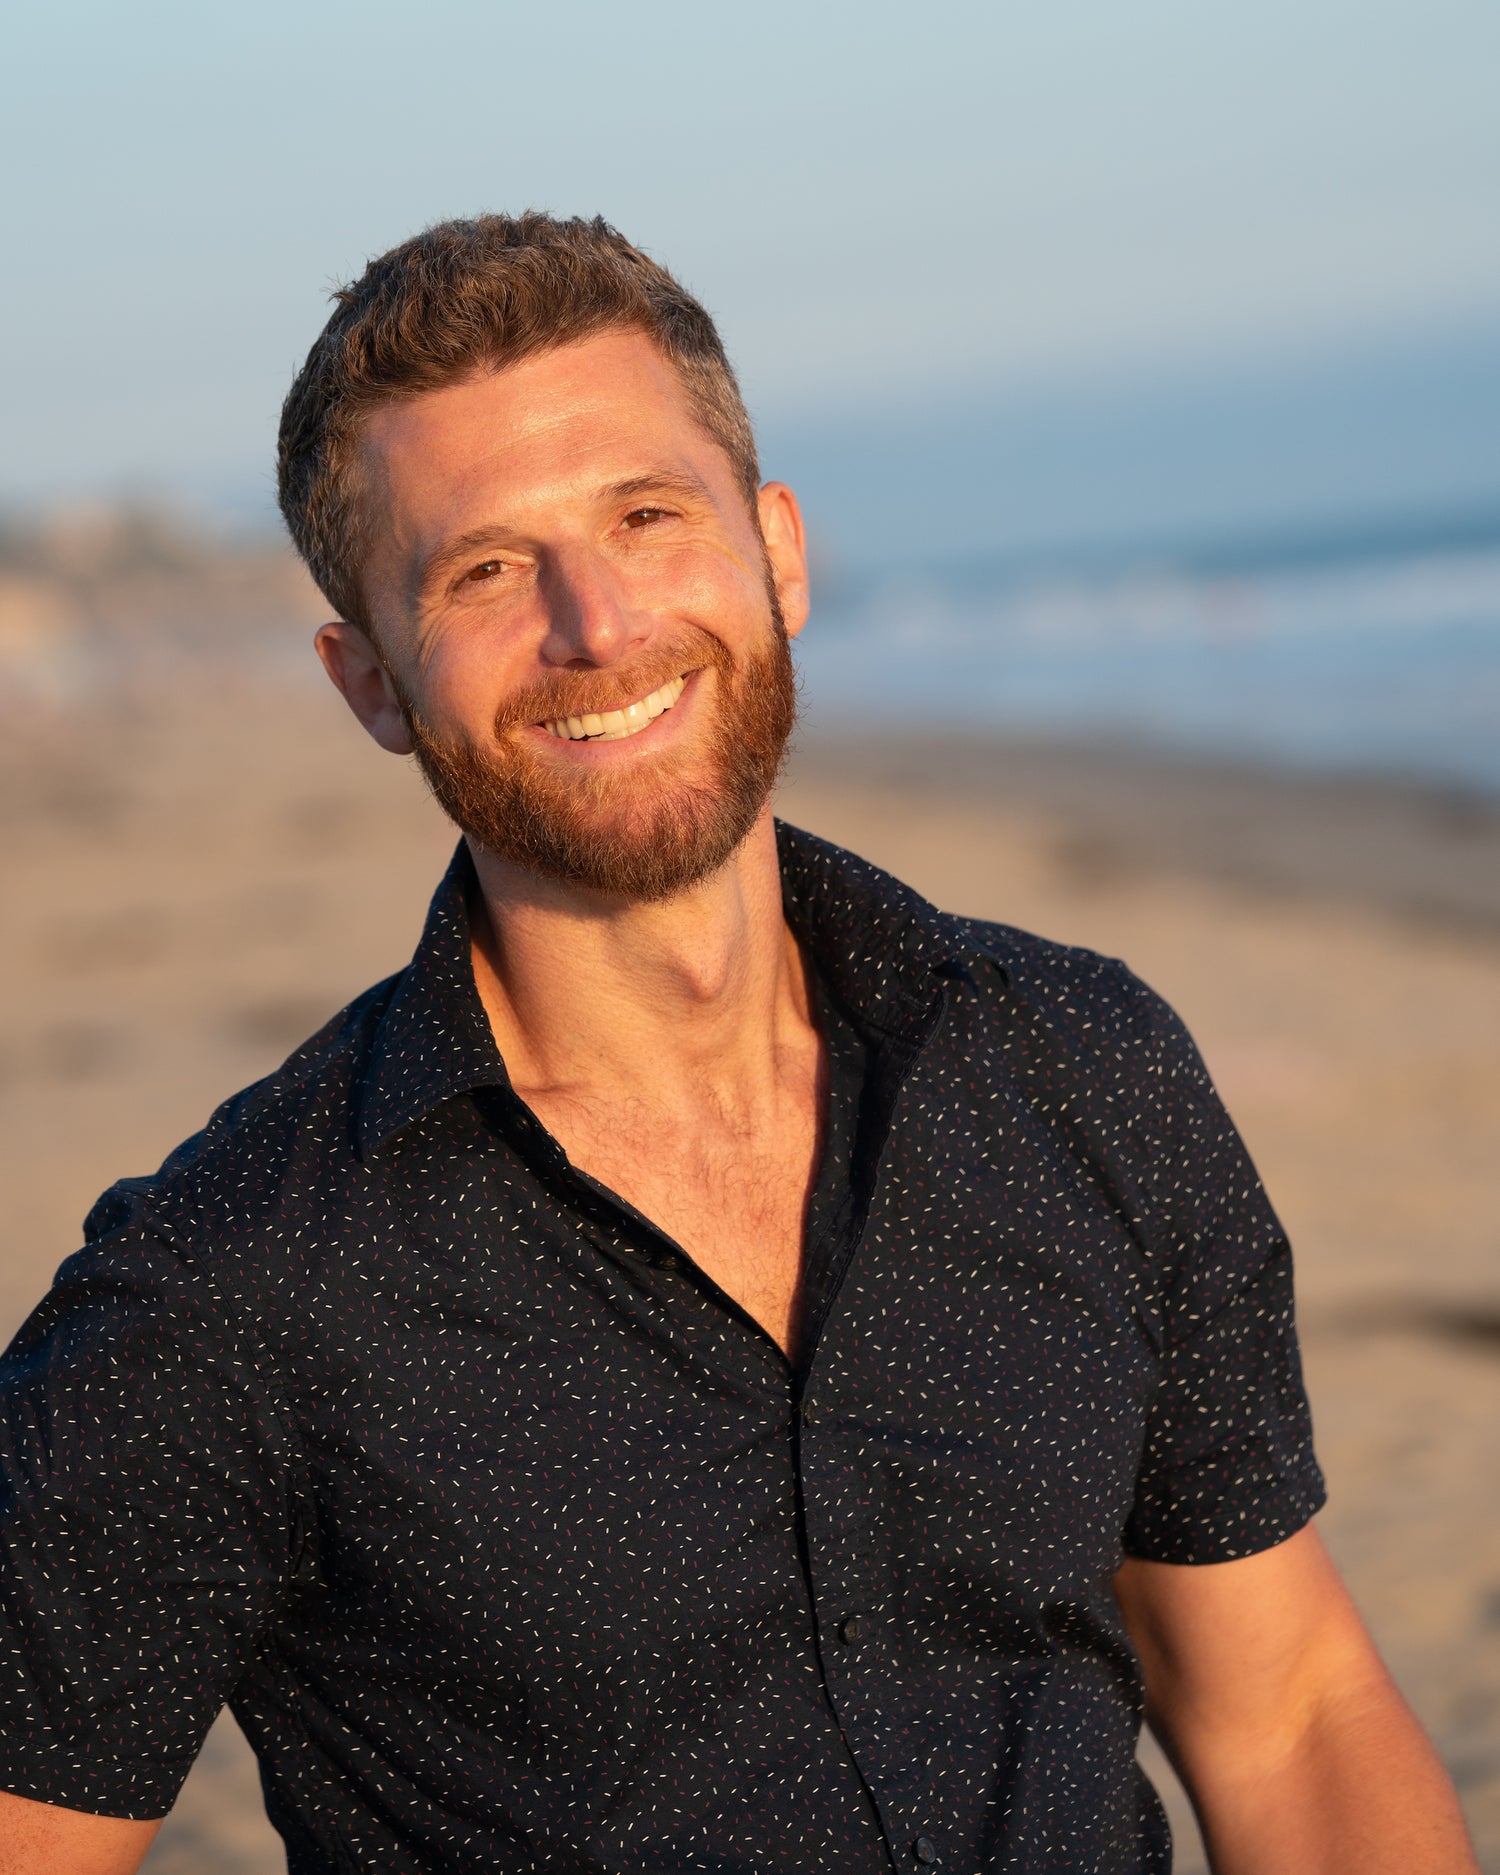 A smiling man with short brown hair and a beard stands on a beach during sunset. He is wearing a black short-sleeved shirt with small white dots. The ocean and sandy shore are in the background, creating a warm and relaxed atmosphere.